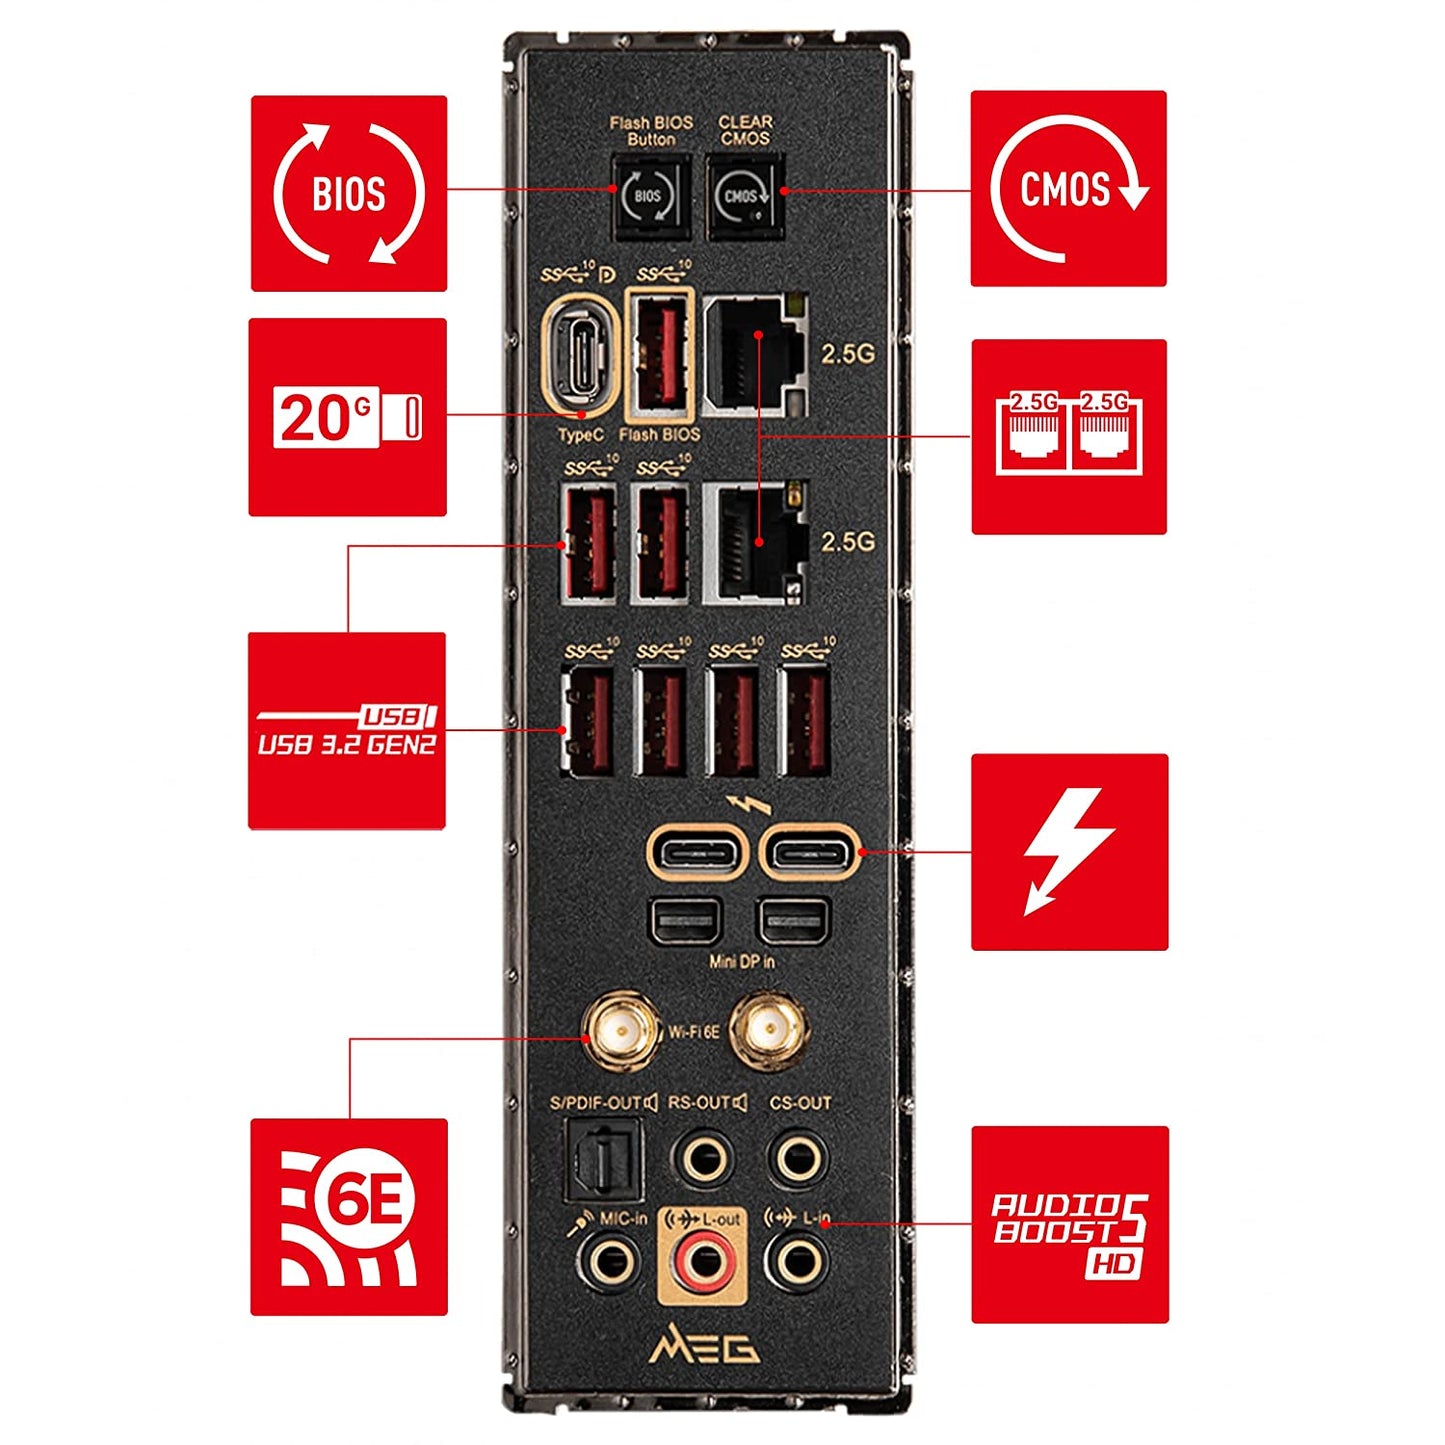 MSI MEG Z690 ACE Gaming Motherboard ATX - Supports Intel Core 12th Gen Processors